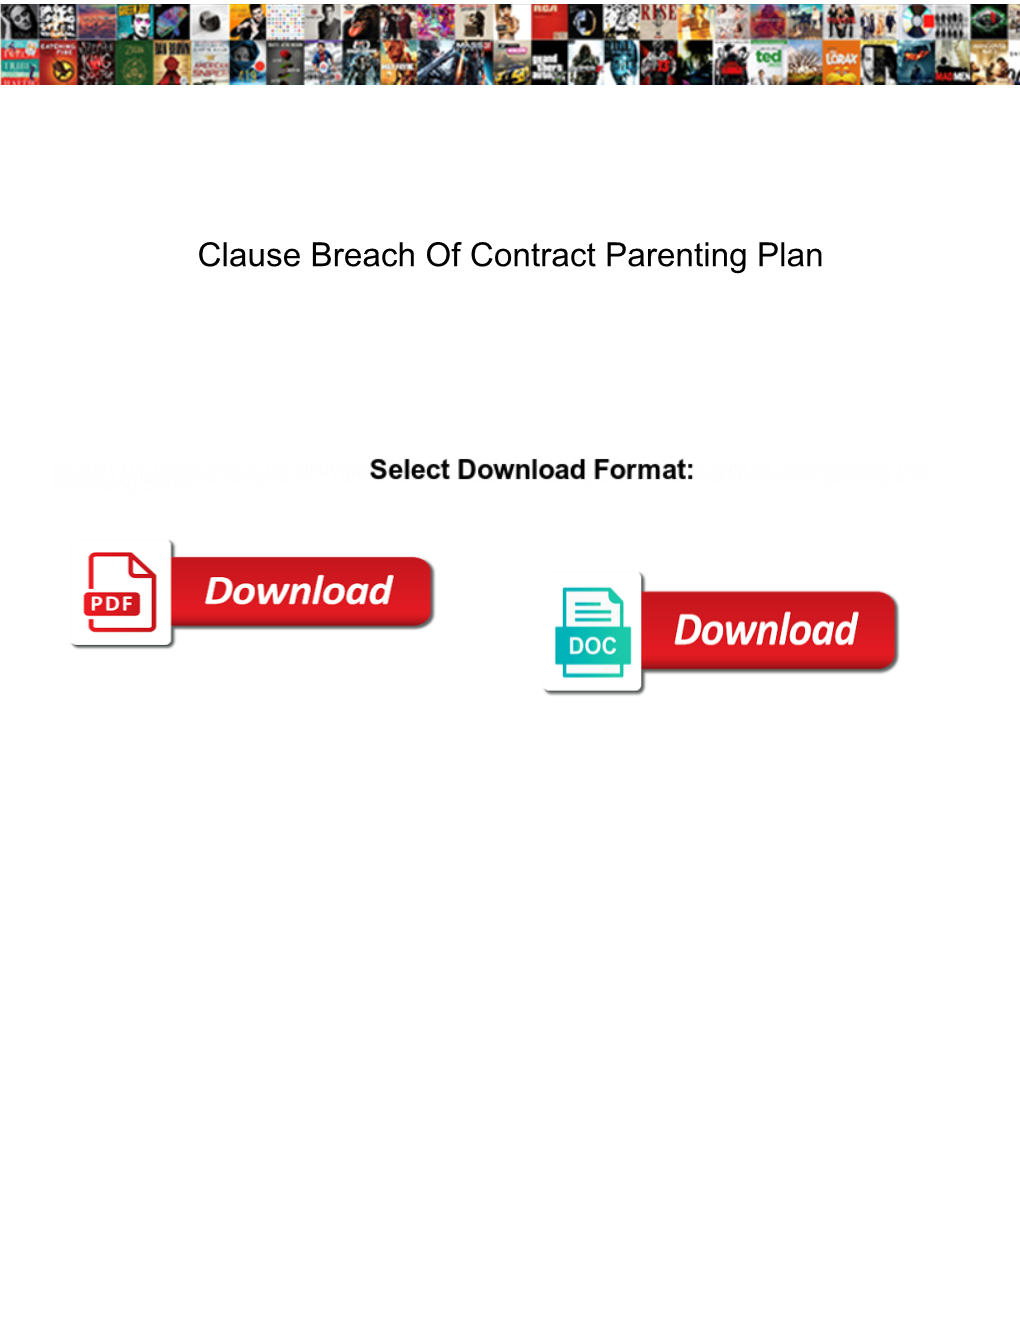 Clause Breach of Contract Parenting Plan